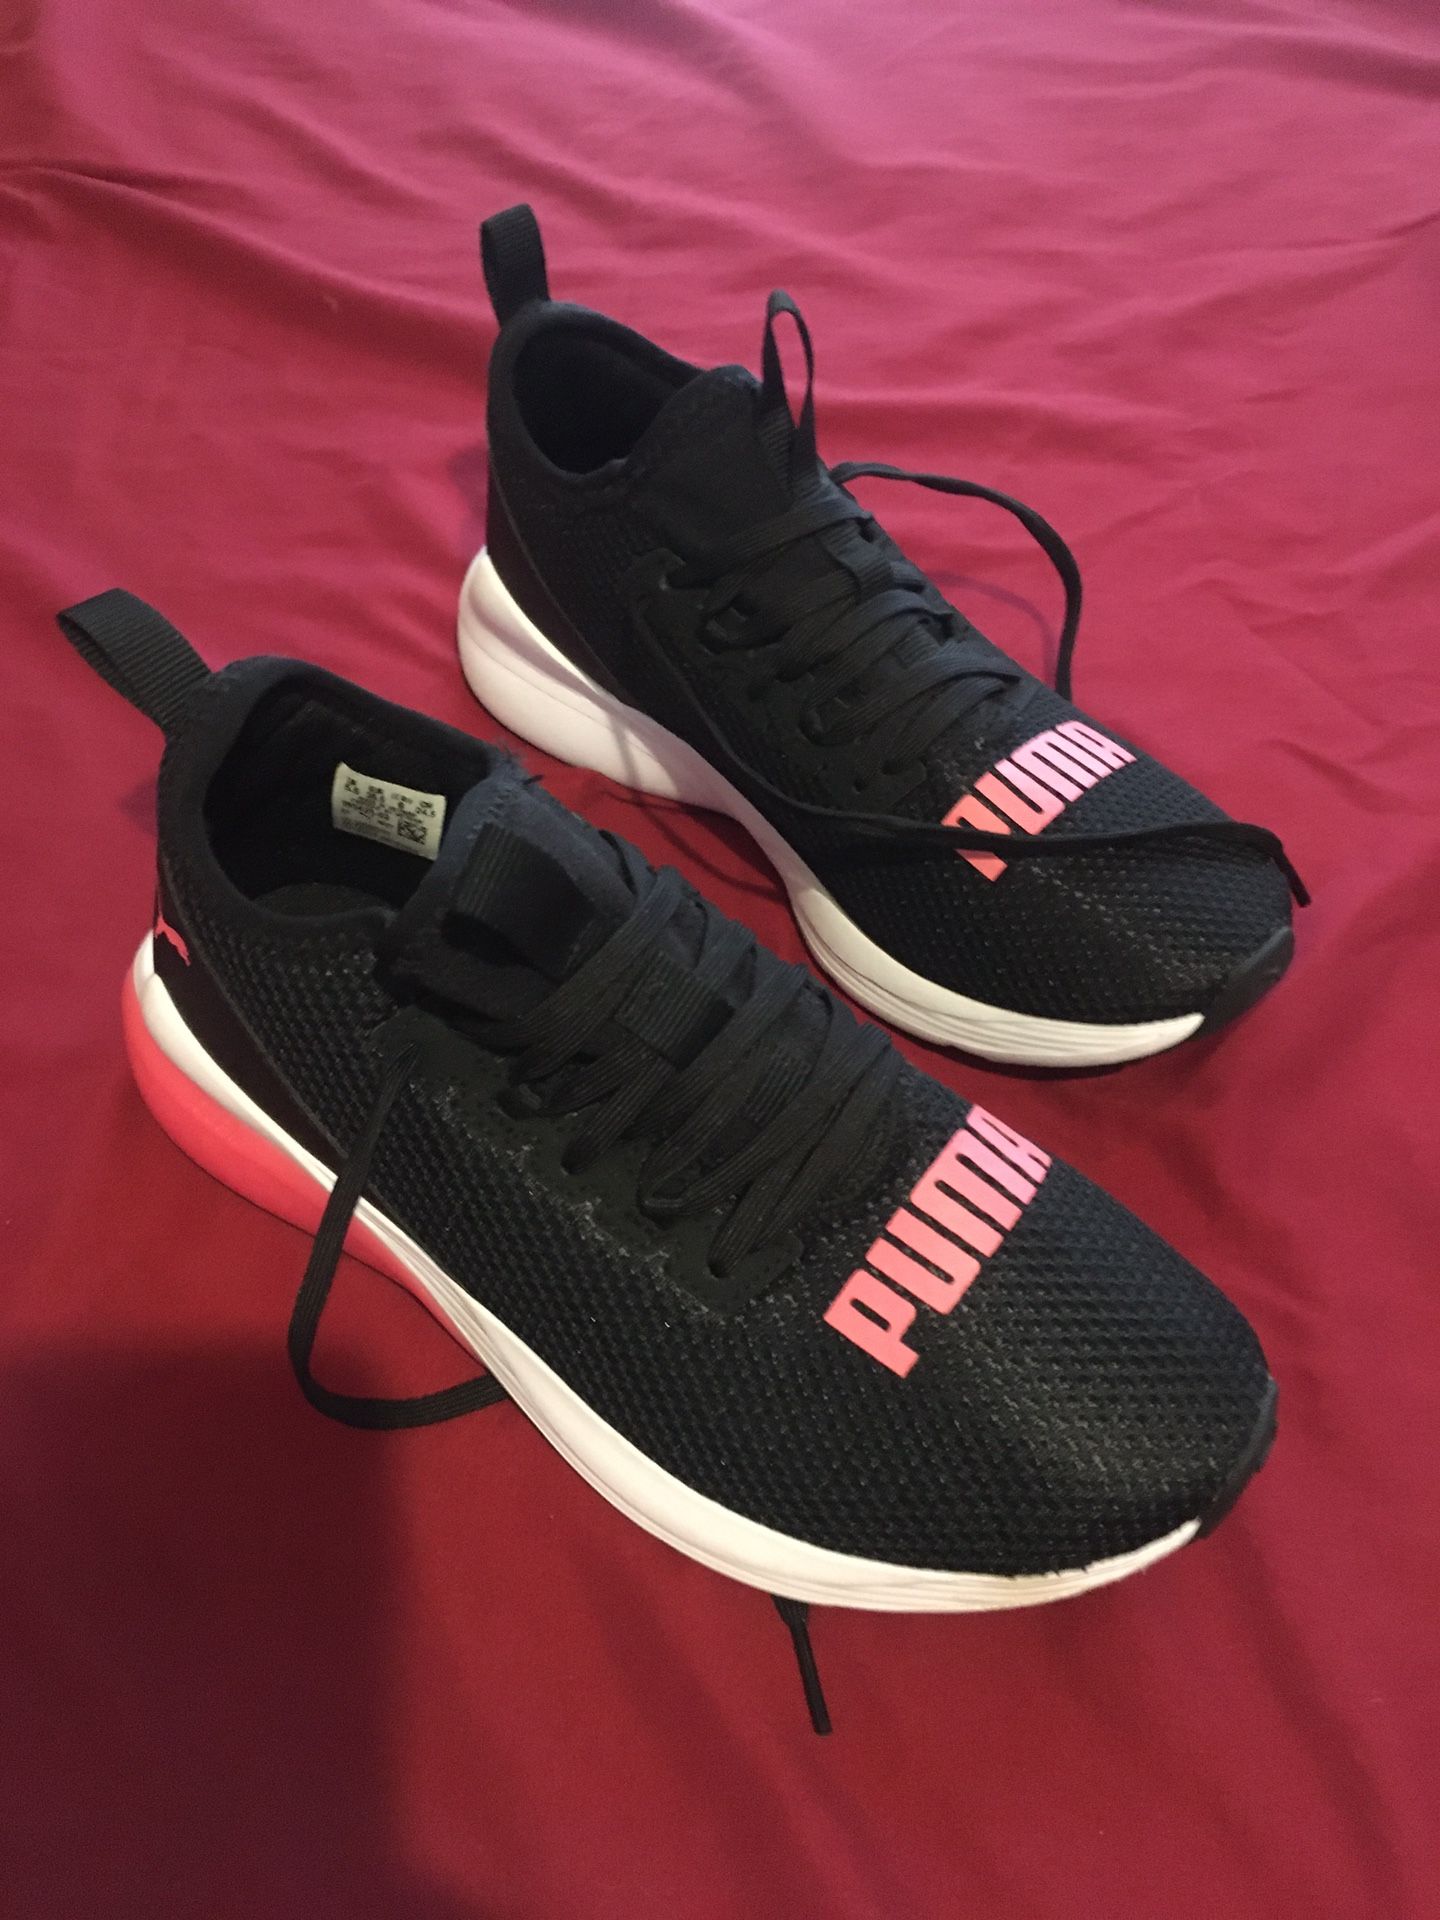 Puma Running Shoes For Women’s Size 8  